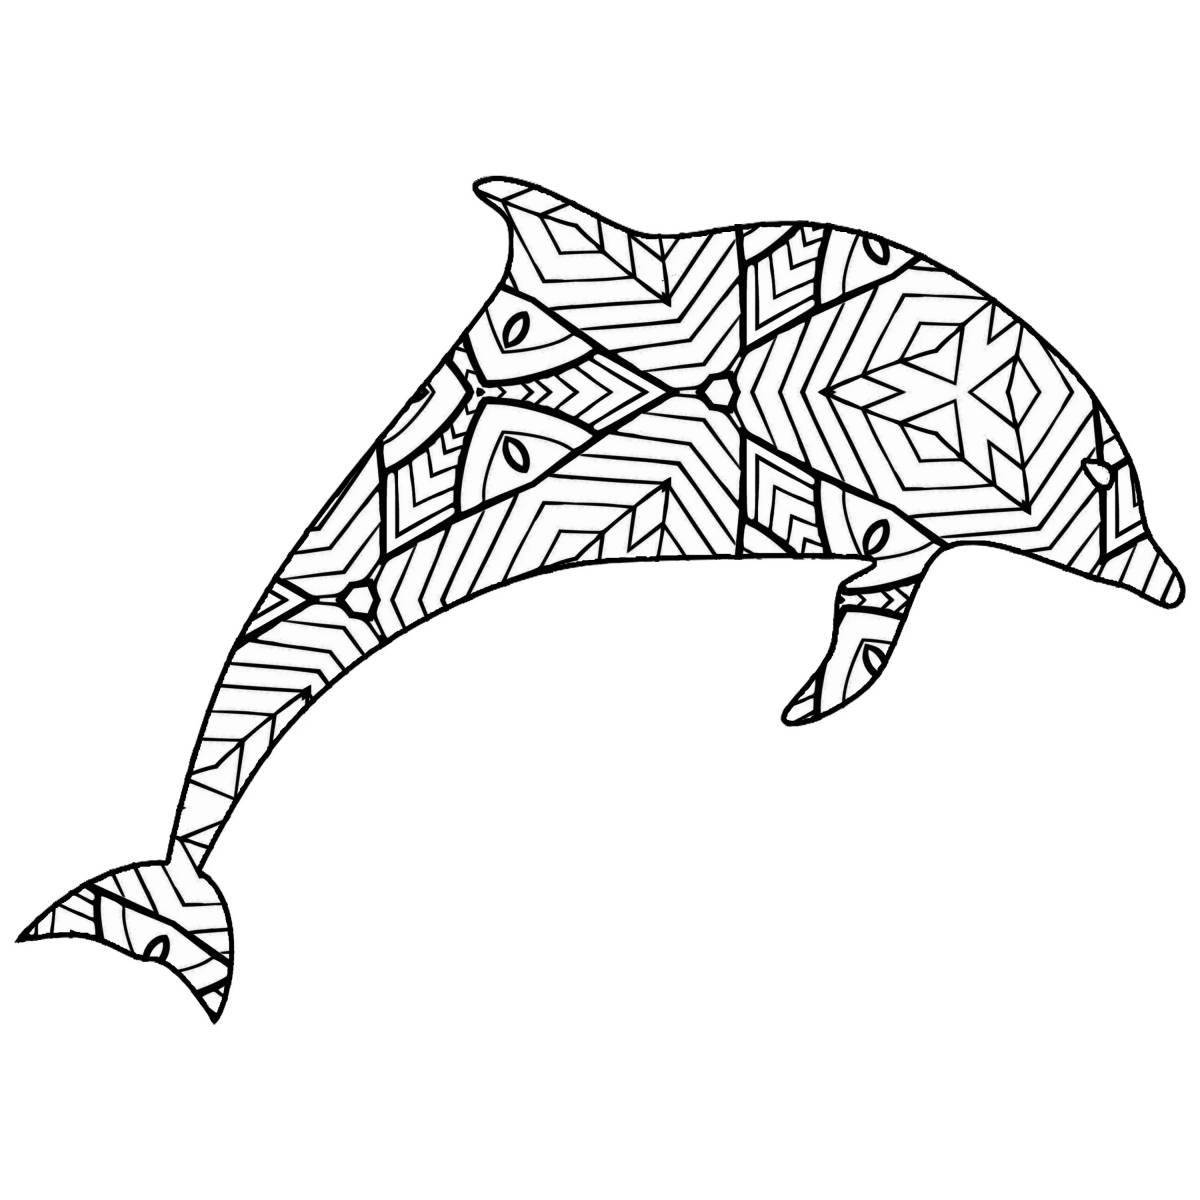 Creative patterned animal coloring book